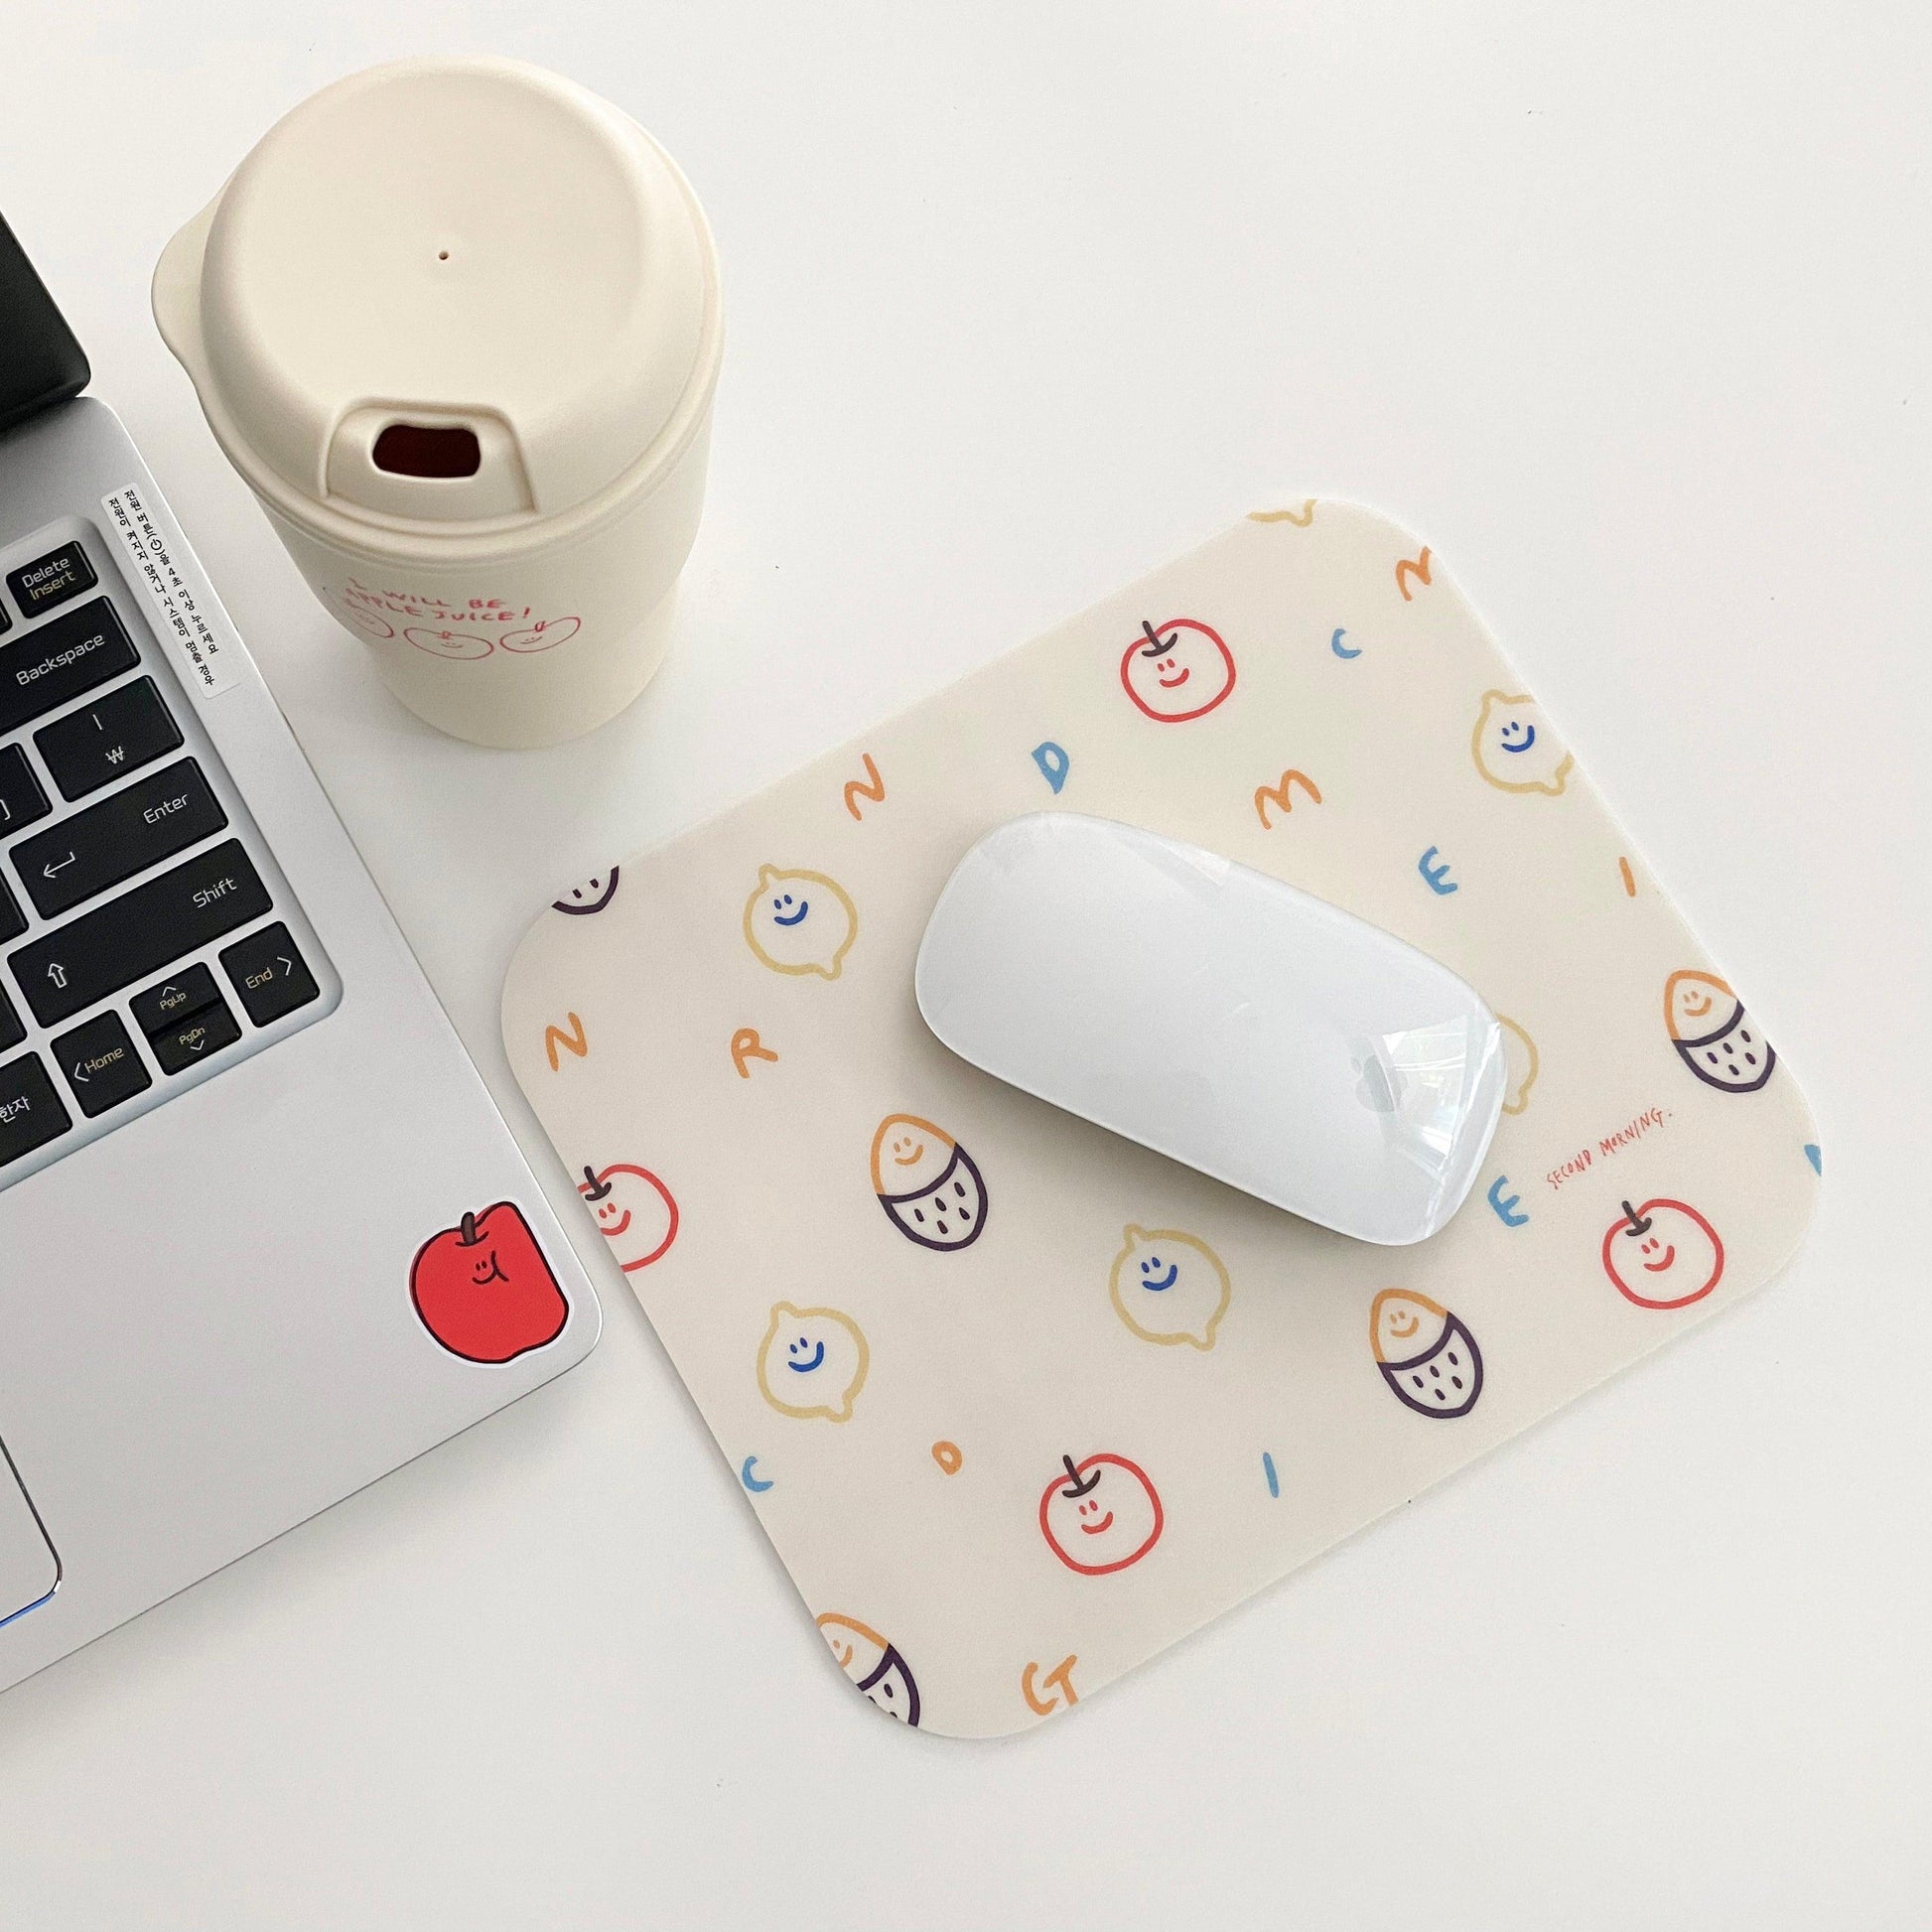 Second Morning Semo Friends Mouse Pad 滑鼠墊 - SOUL SIMPLE HK